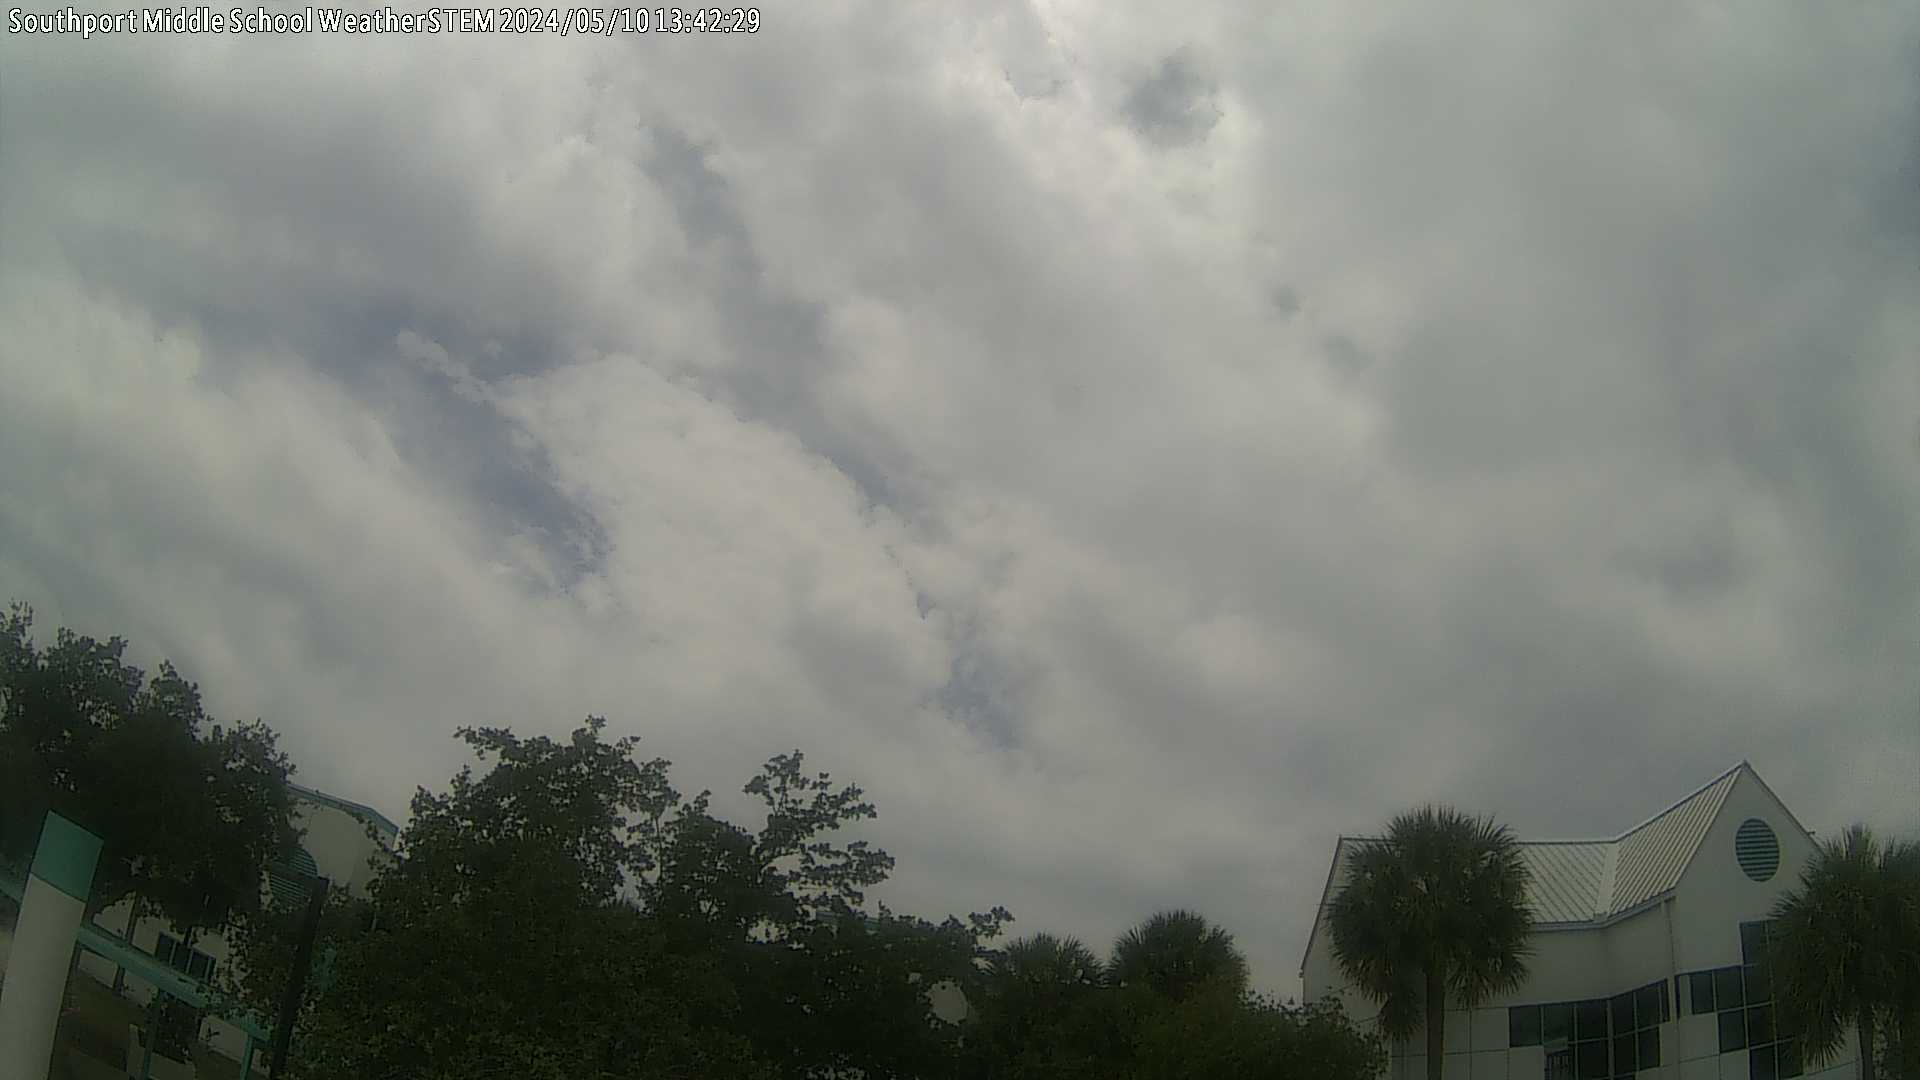  WeatherSTEM Cloud Camera SPMWxSTEM in St. Lucie County, Florida FL at Southport Middle School